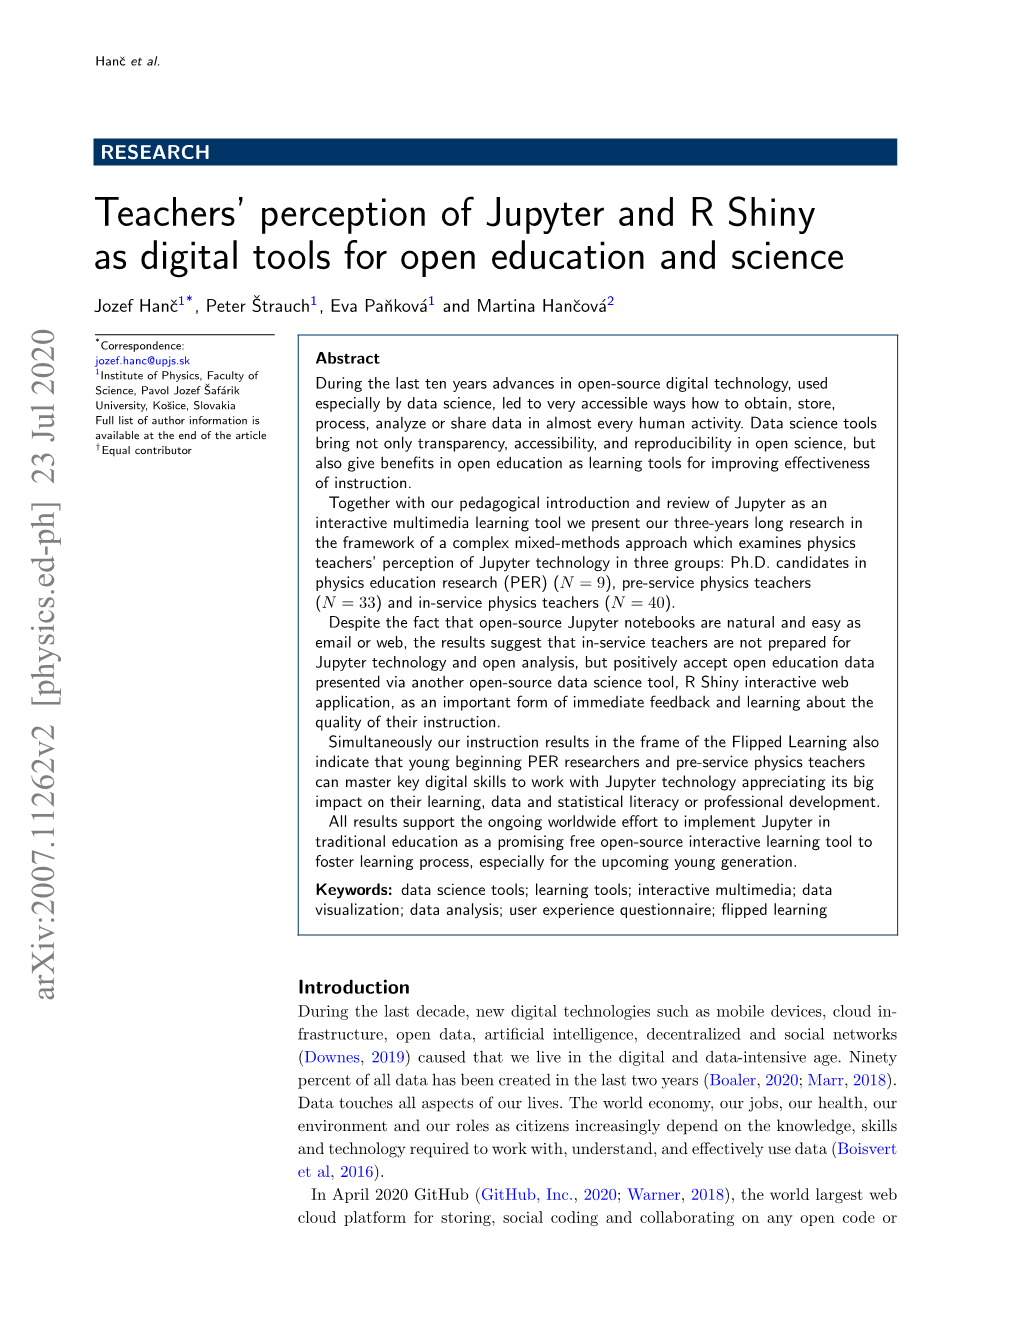 Teachers' Perception of Jupyter and R Shiny As Digital Tools for Open